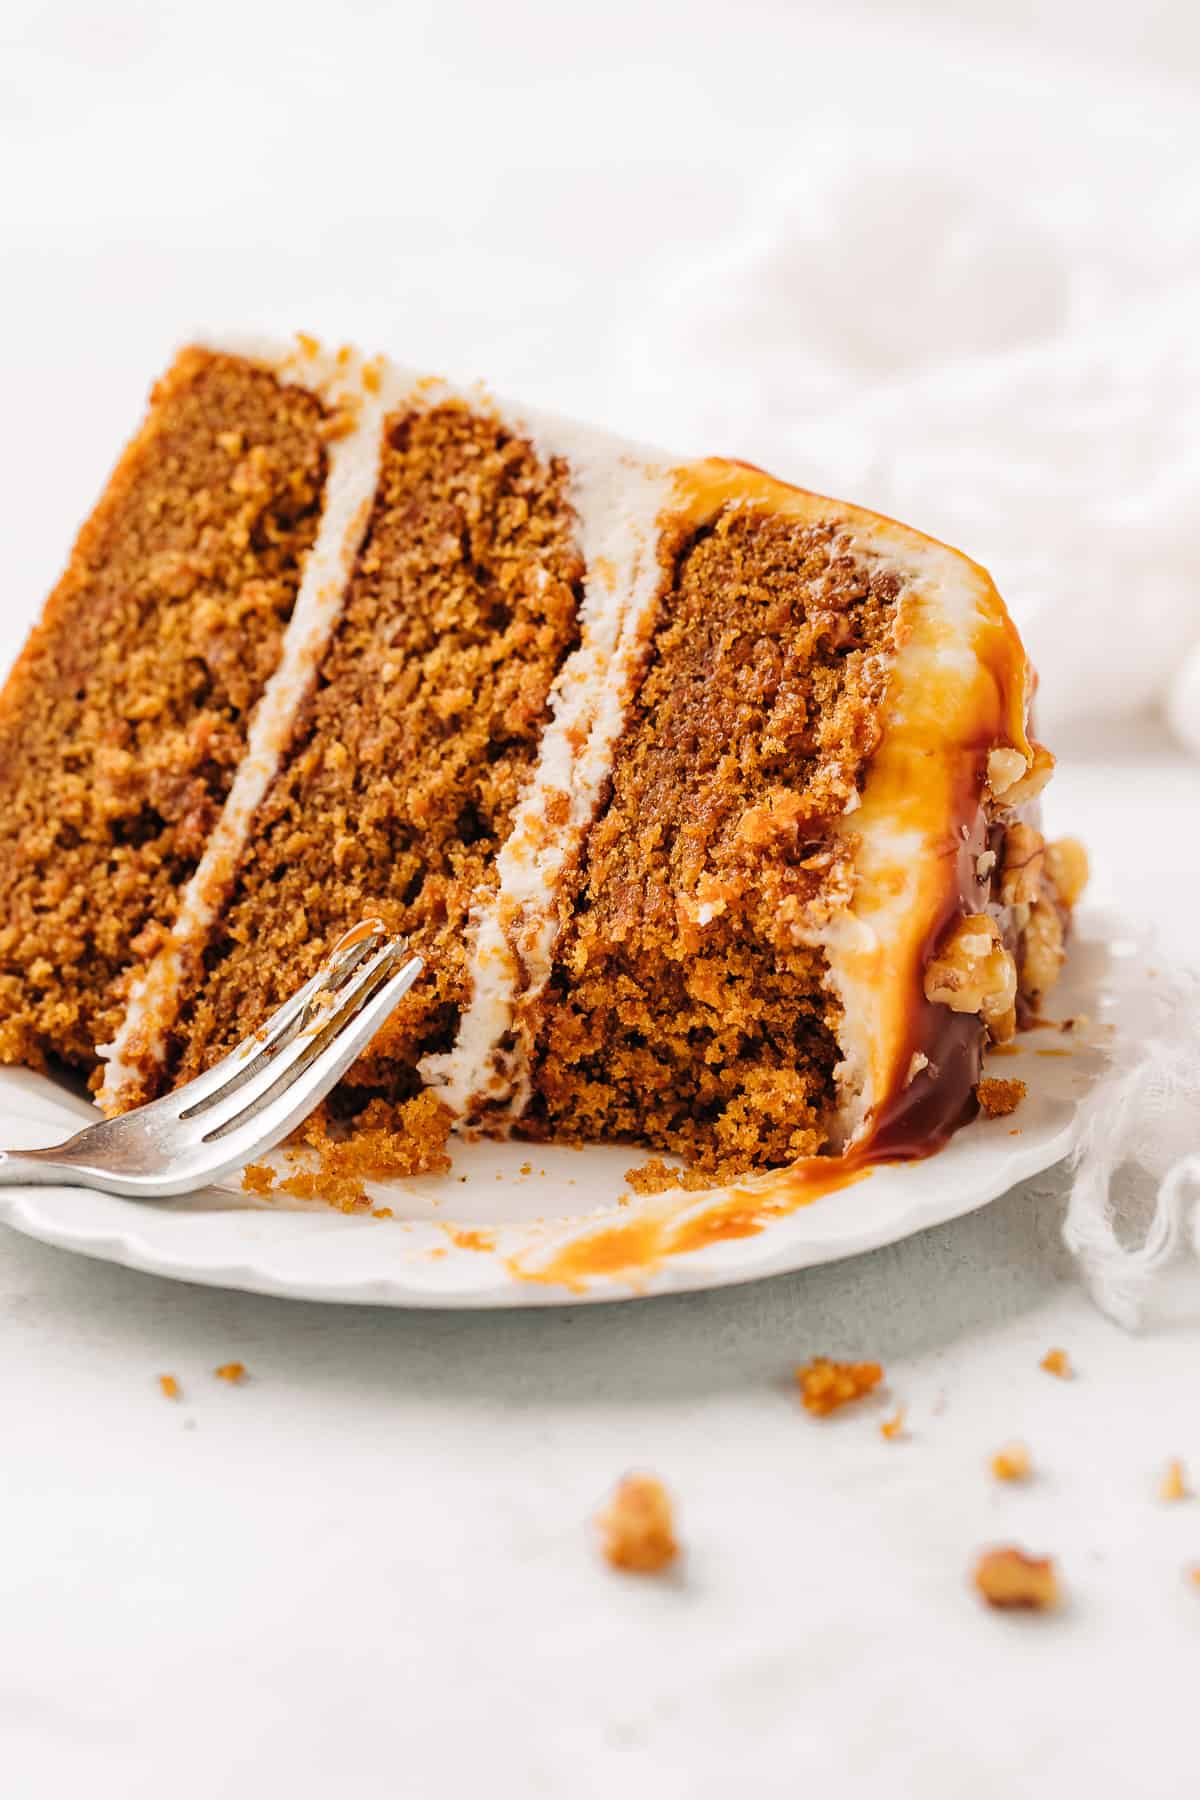 Slice of carrot cake with cream cheese frosting on a white plate.